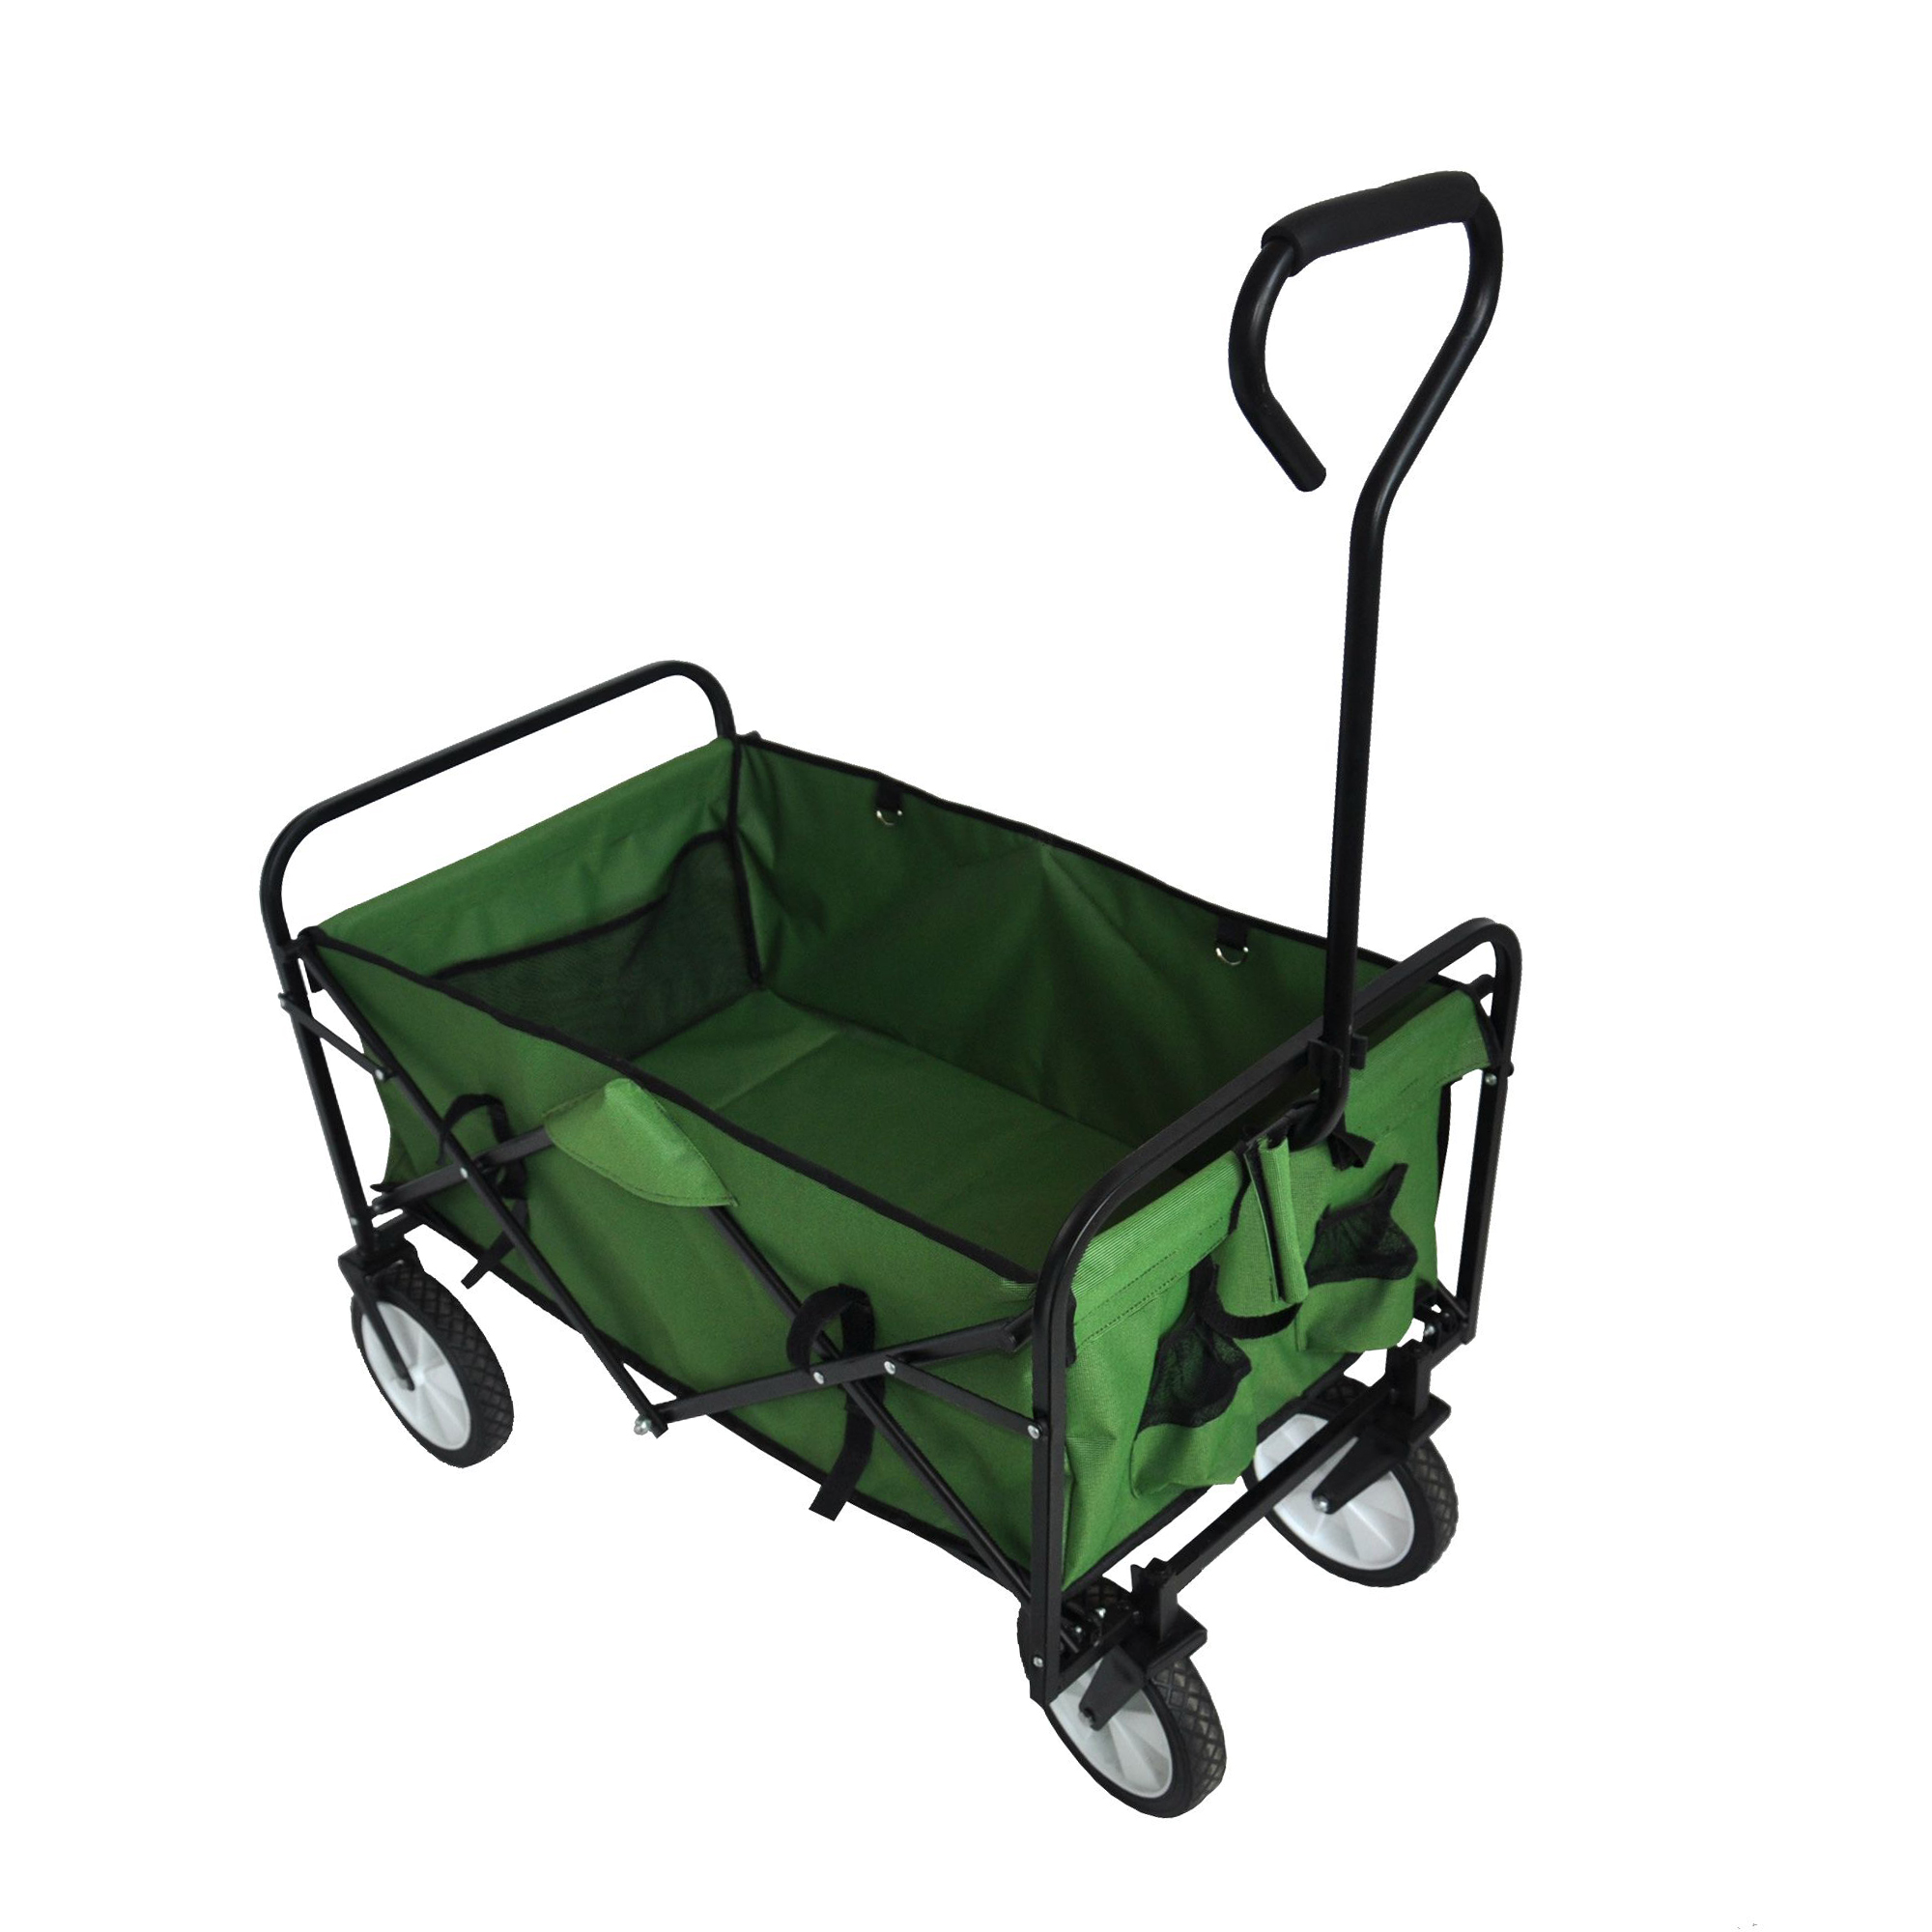 Beach Wagons with Big Wheels for Sand, Sturdy Steel Frame Collapsible Wagon, Foldable Wagon, Grocery Wagon with 3 Side Storage Bags, 2 Mesh Cup Holders, Elastic Rope, Adjustable Handle, Green, Q3808 - image 3 of 12